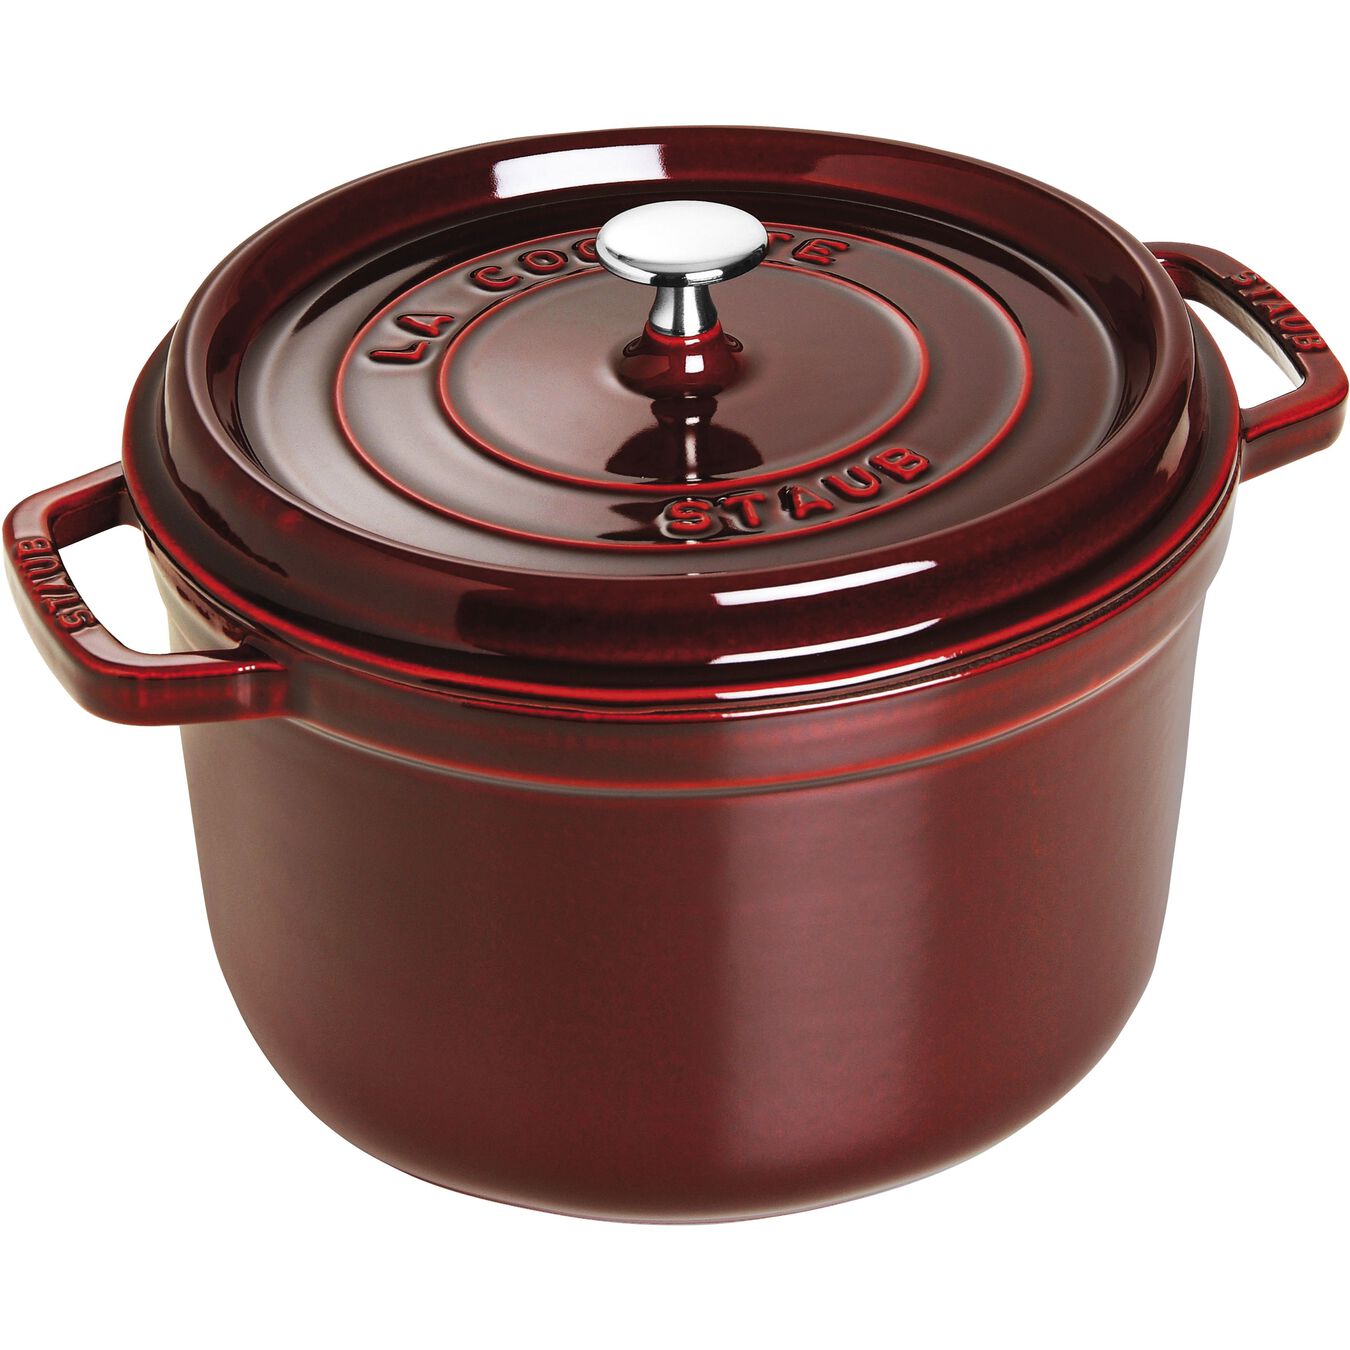  Staub Cast Iron Dutch Oven 5-qt Tall Cocotte, Made in